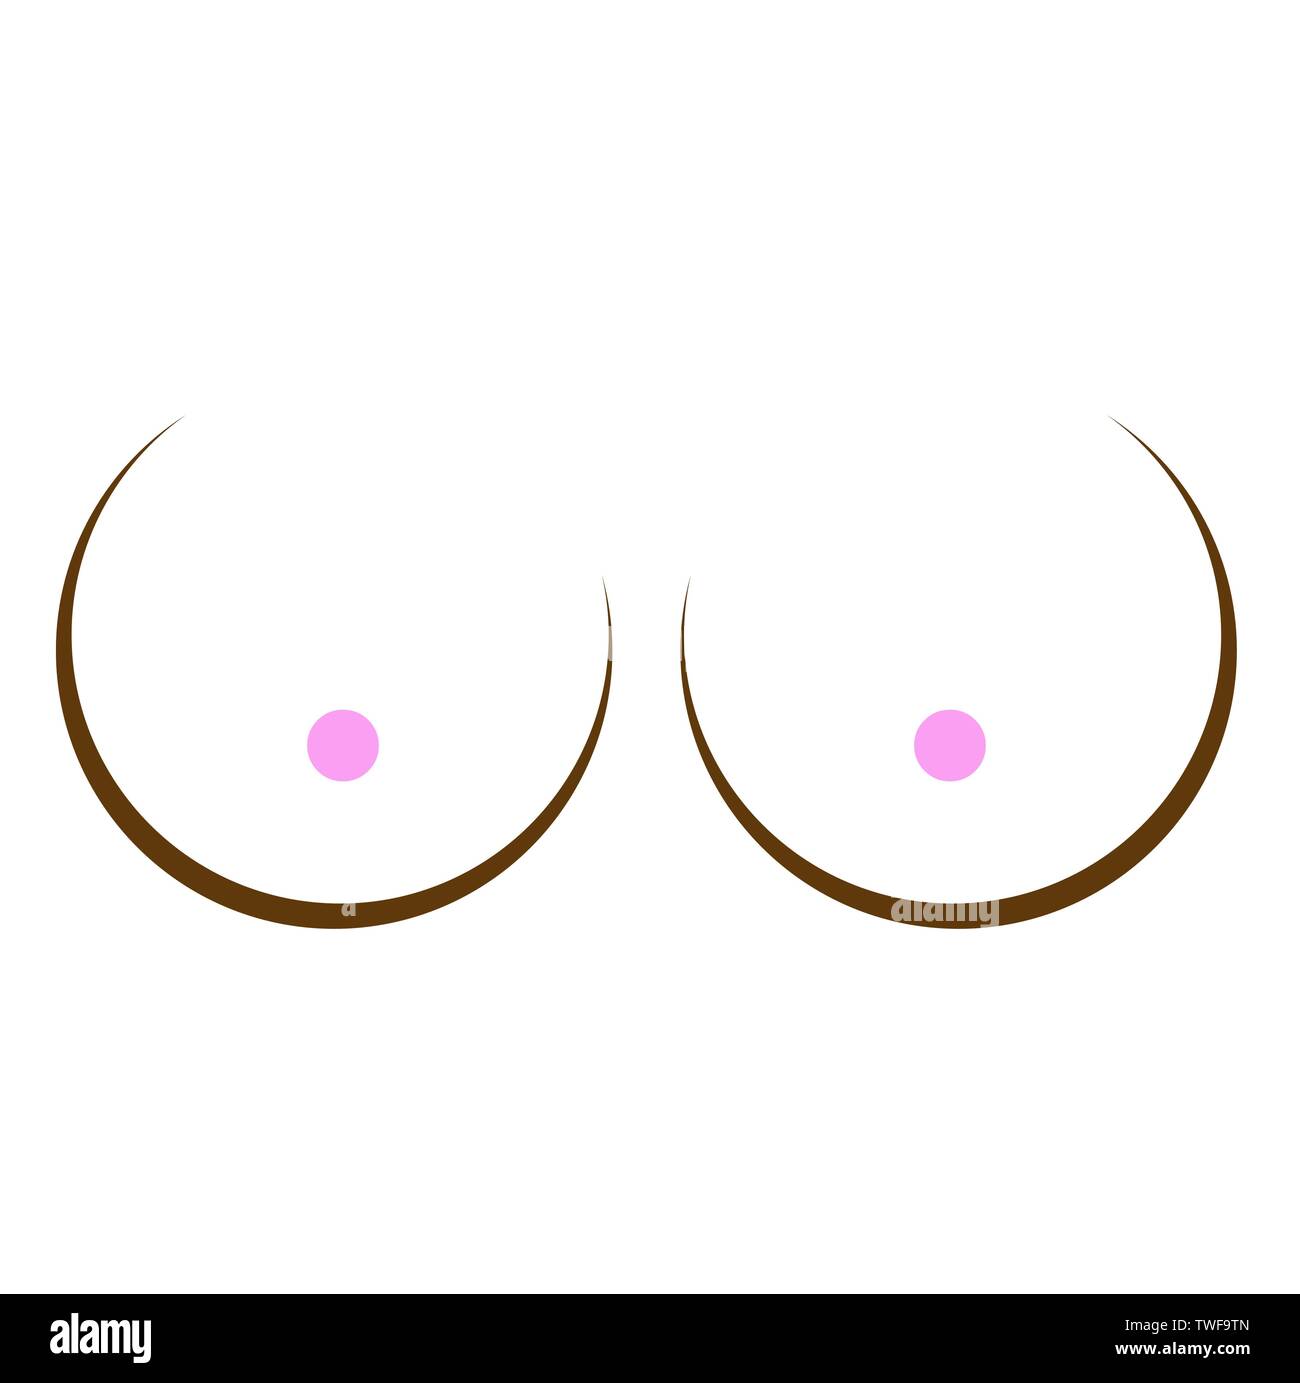 Abstract drawing of female breasts- breast cancer awareness symbol